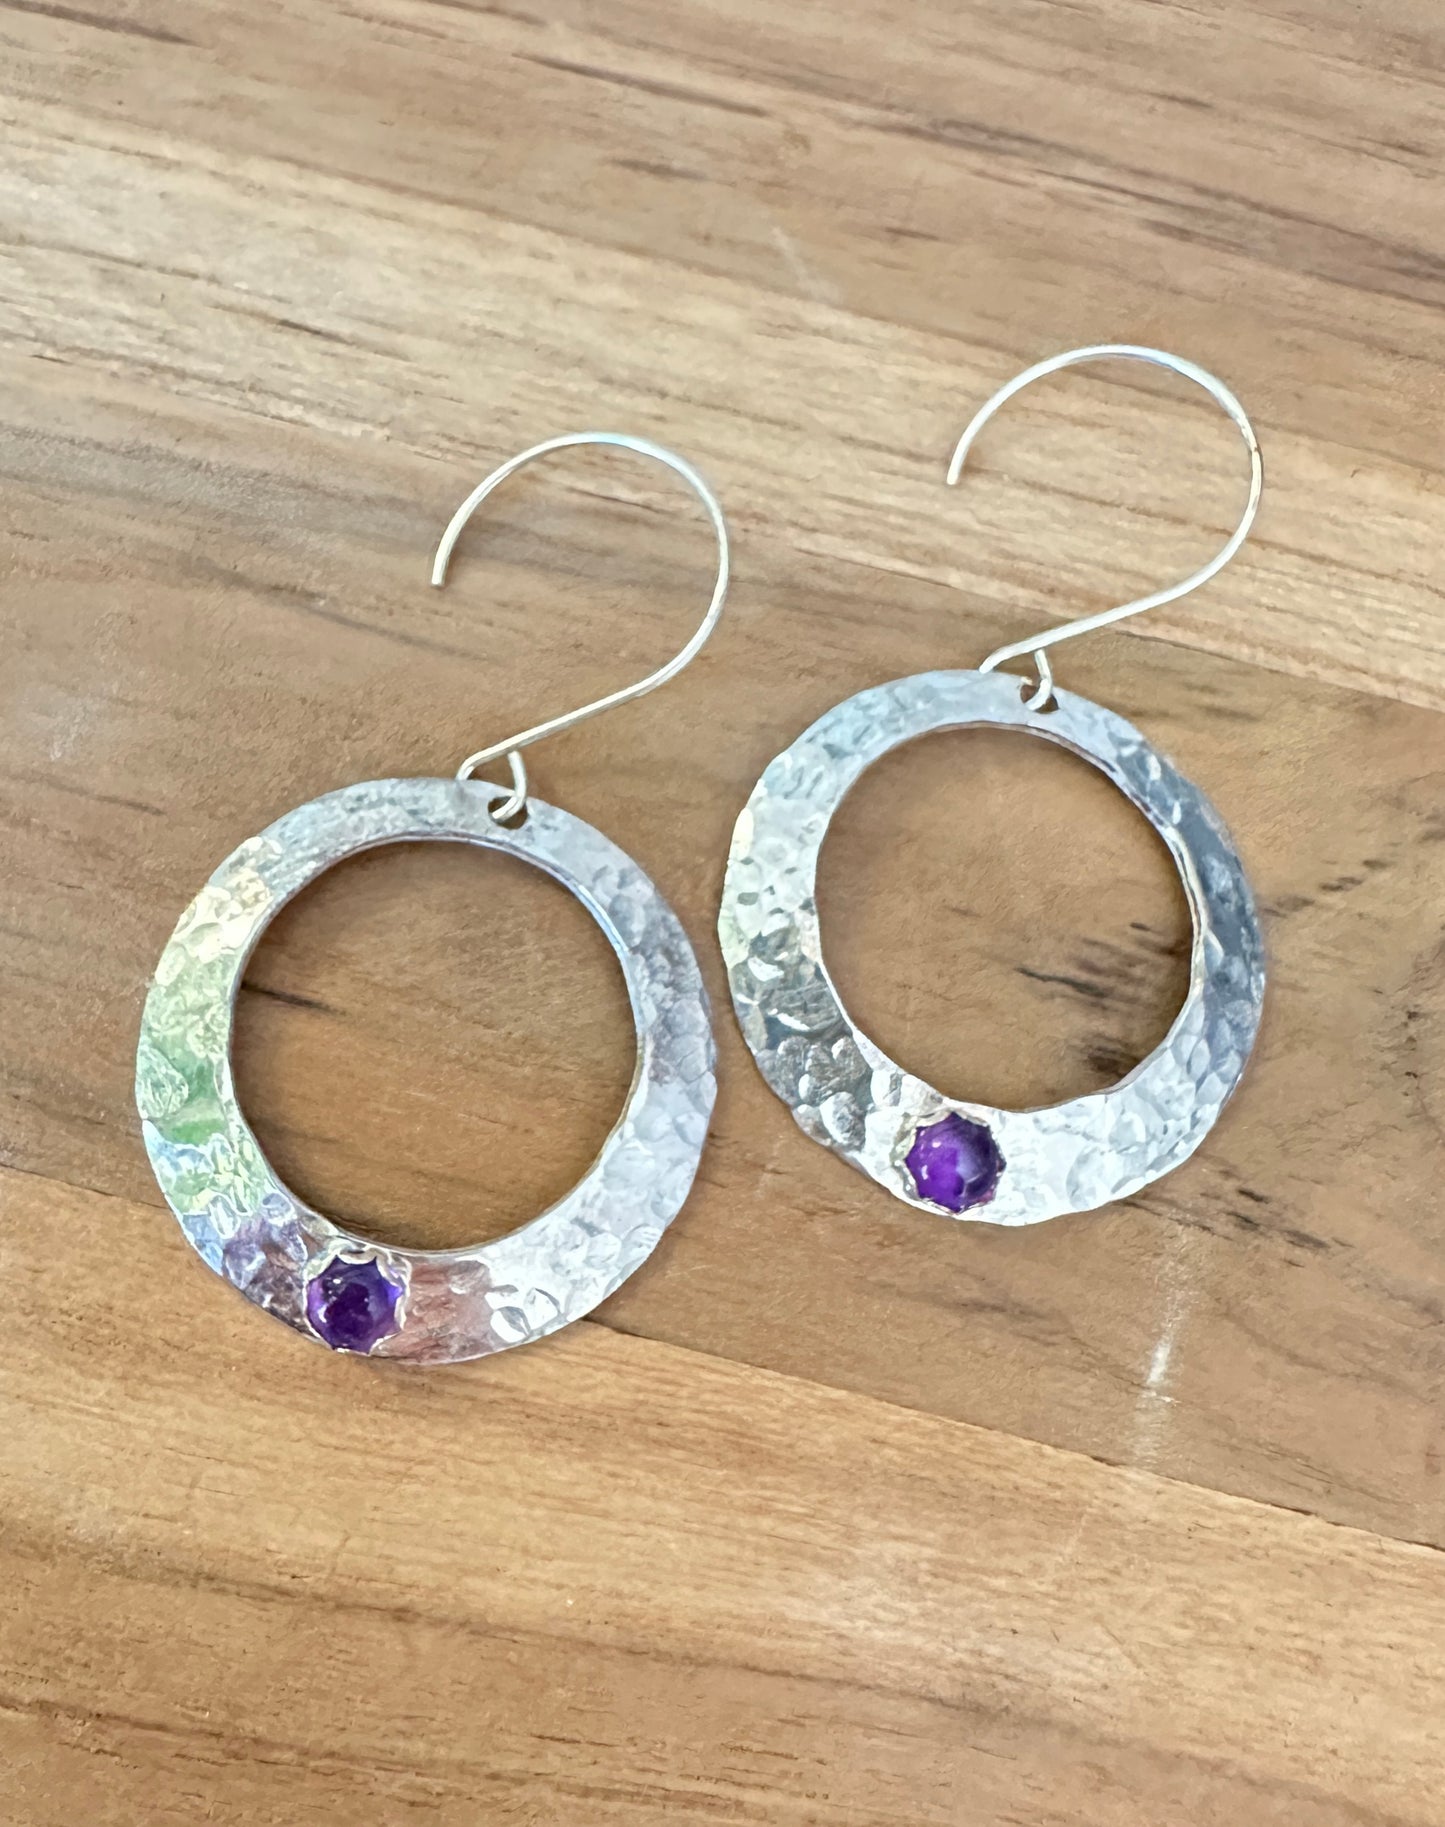 Hammered Circle Earrings with Amethyst Stone